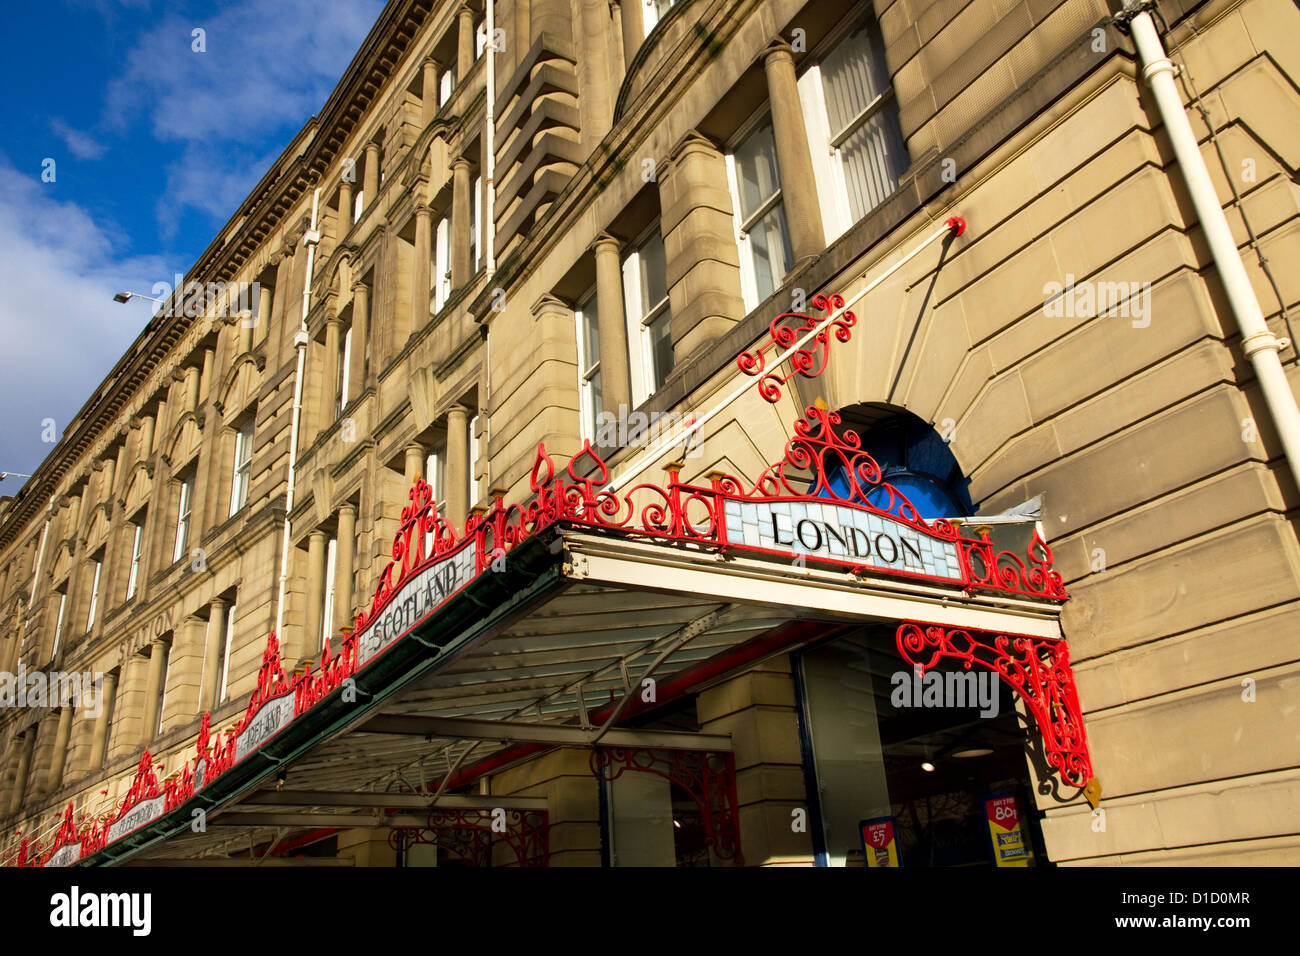 Victoria railway station, with ornate destination signs on canopy, city centre, Manchester, England, UK Stock Photo